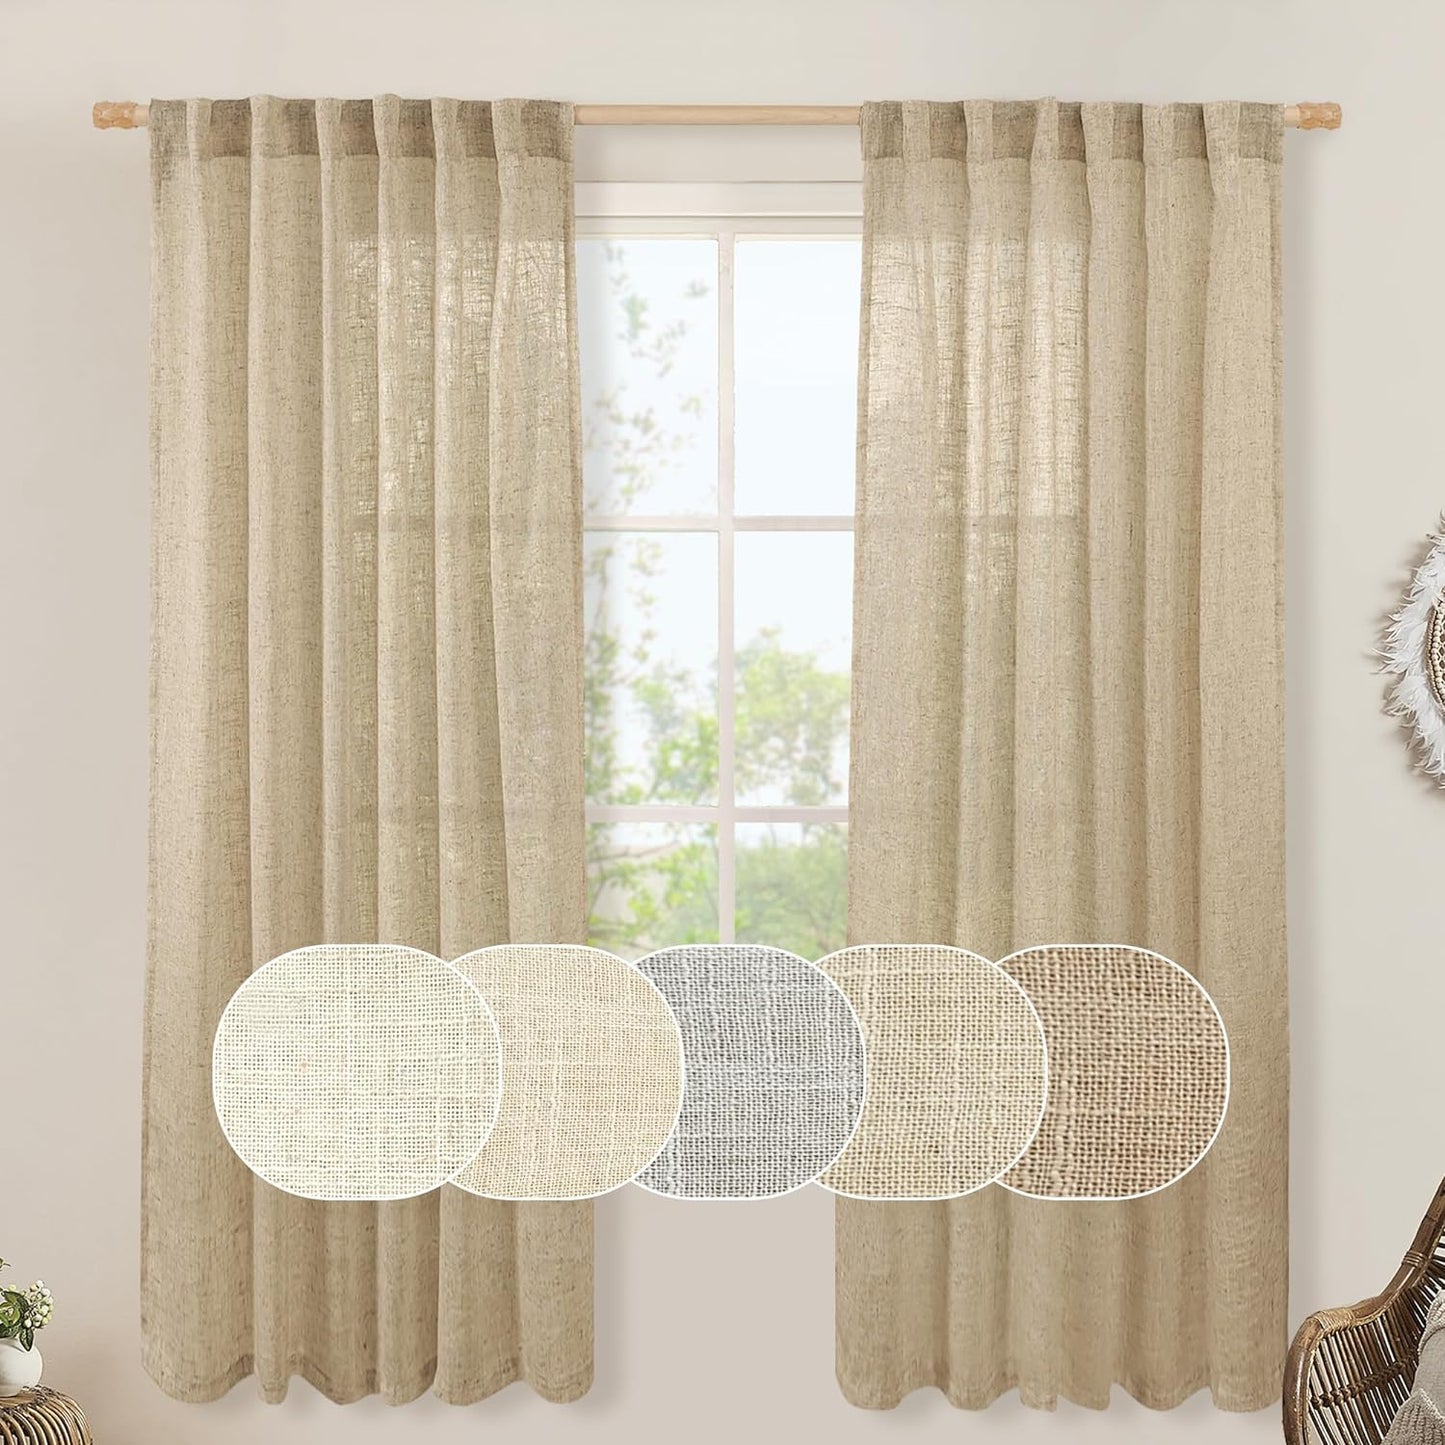 LAMIT Natural Linen Blended Curtains for Living Room, Back Tab and Rod Pocket Semi Sheer Curtains Light Filtering Country Rustic Drapes for Bedroom/Farmhouse, 2 Panels,52 X 108 Inch, Linen  LAMIT Brown 52W X 72L 